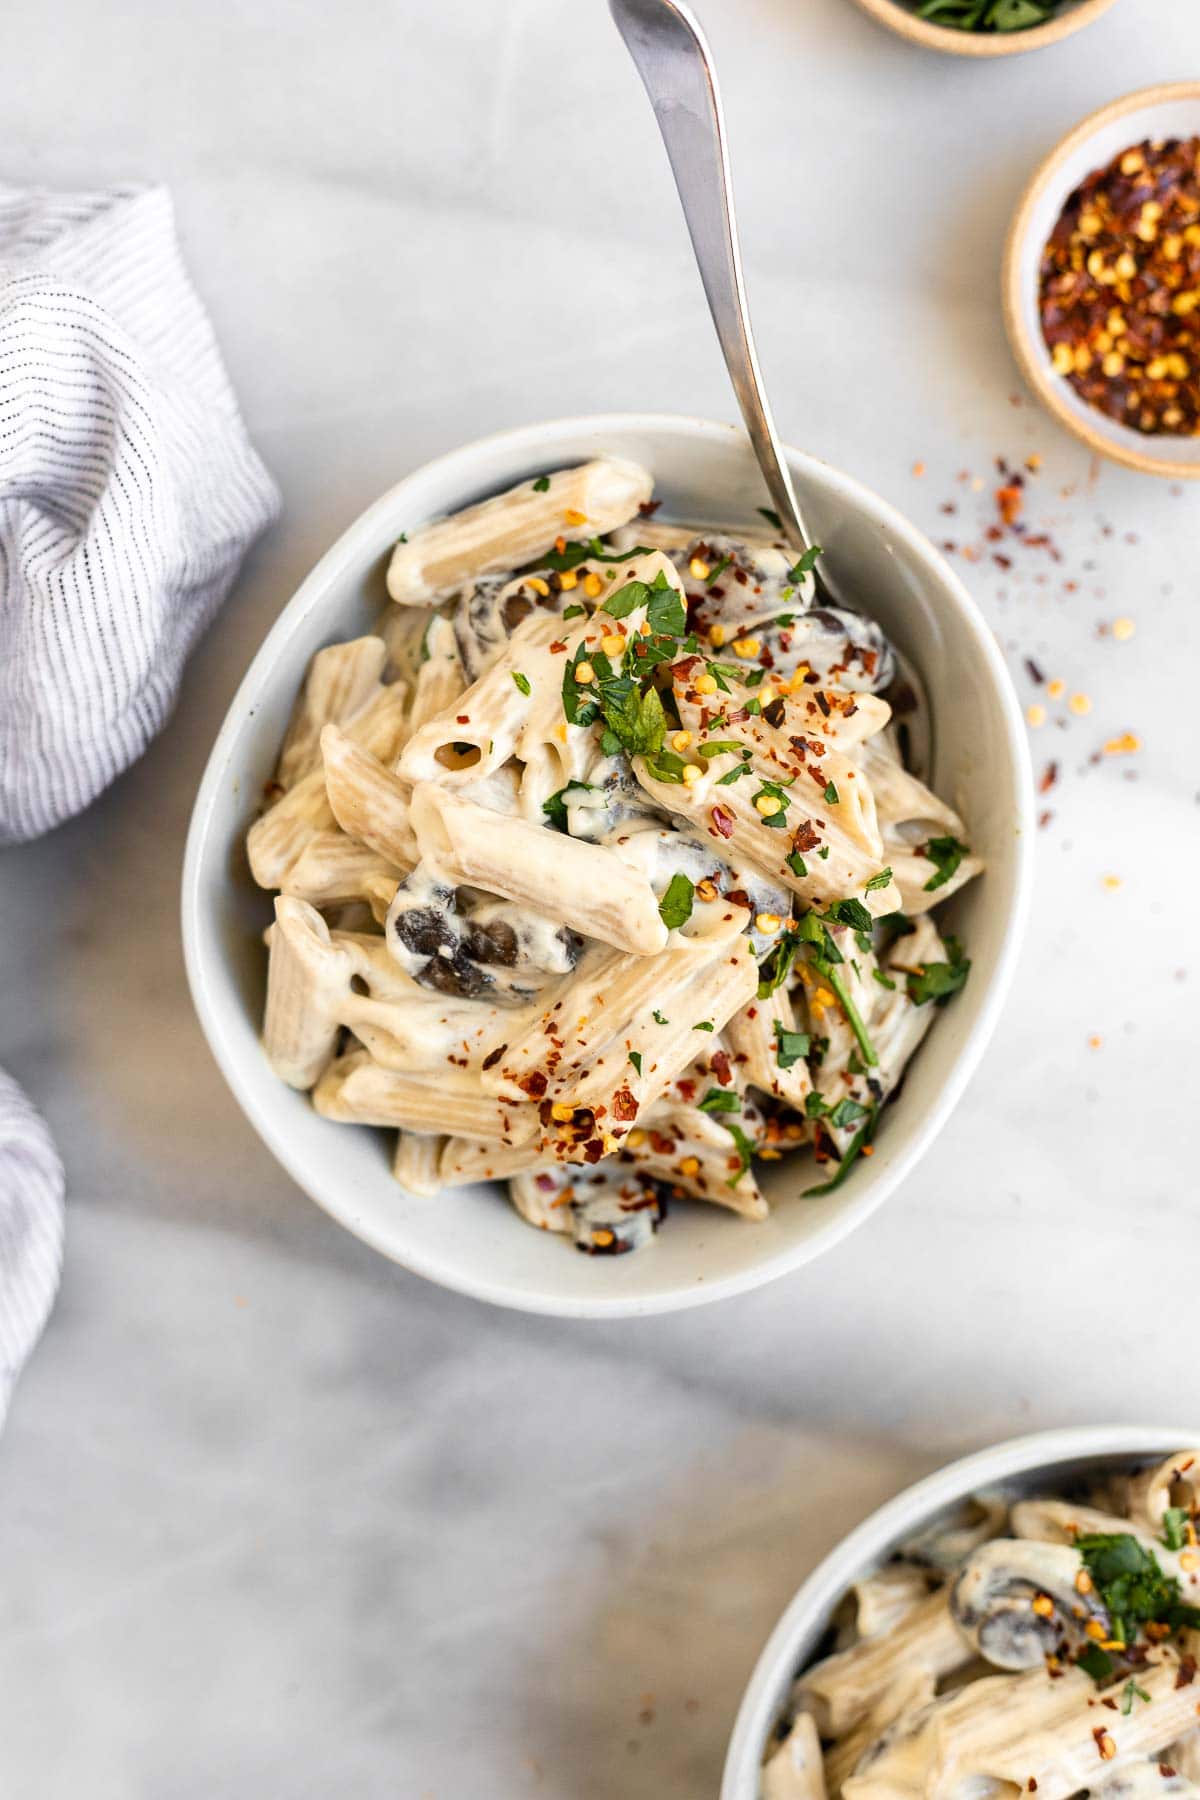 Two bowls of the cashew cream pasta with mushrooms and parsley.